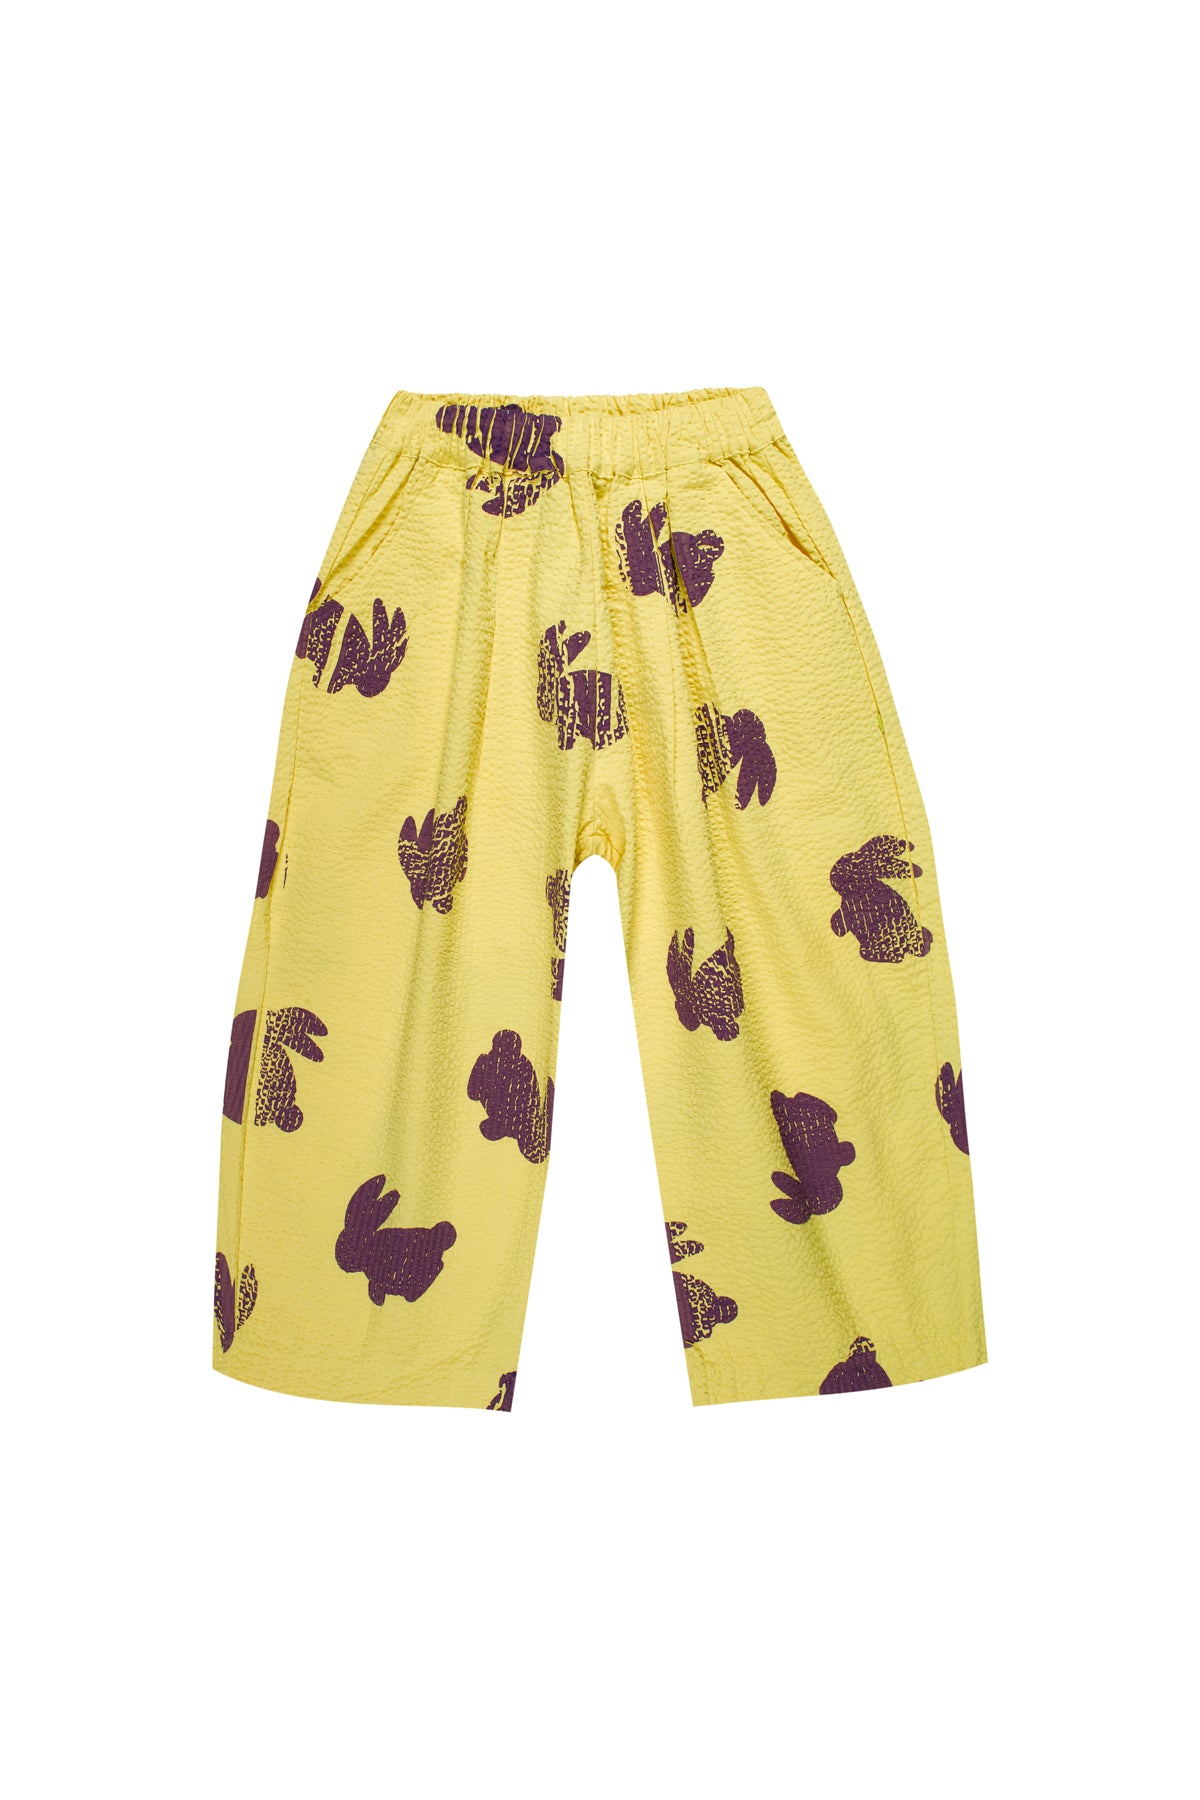 BUNNY PRINT LOOSE TROUSERS makids